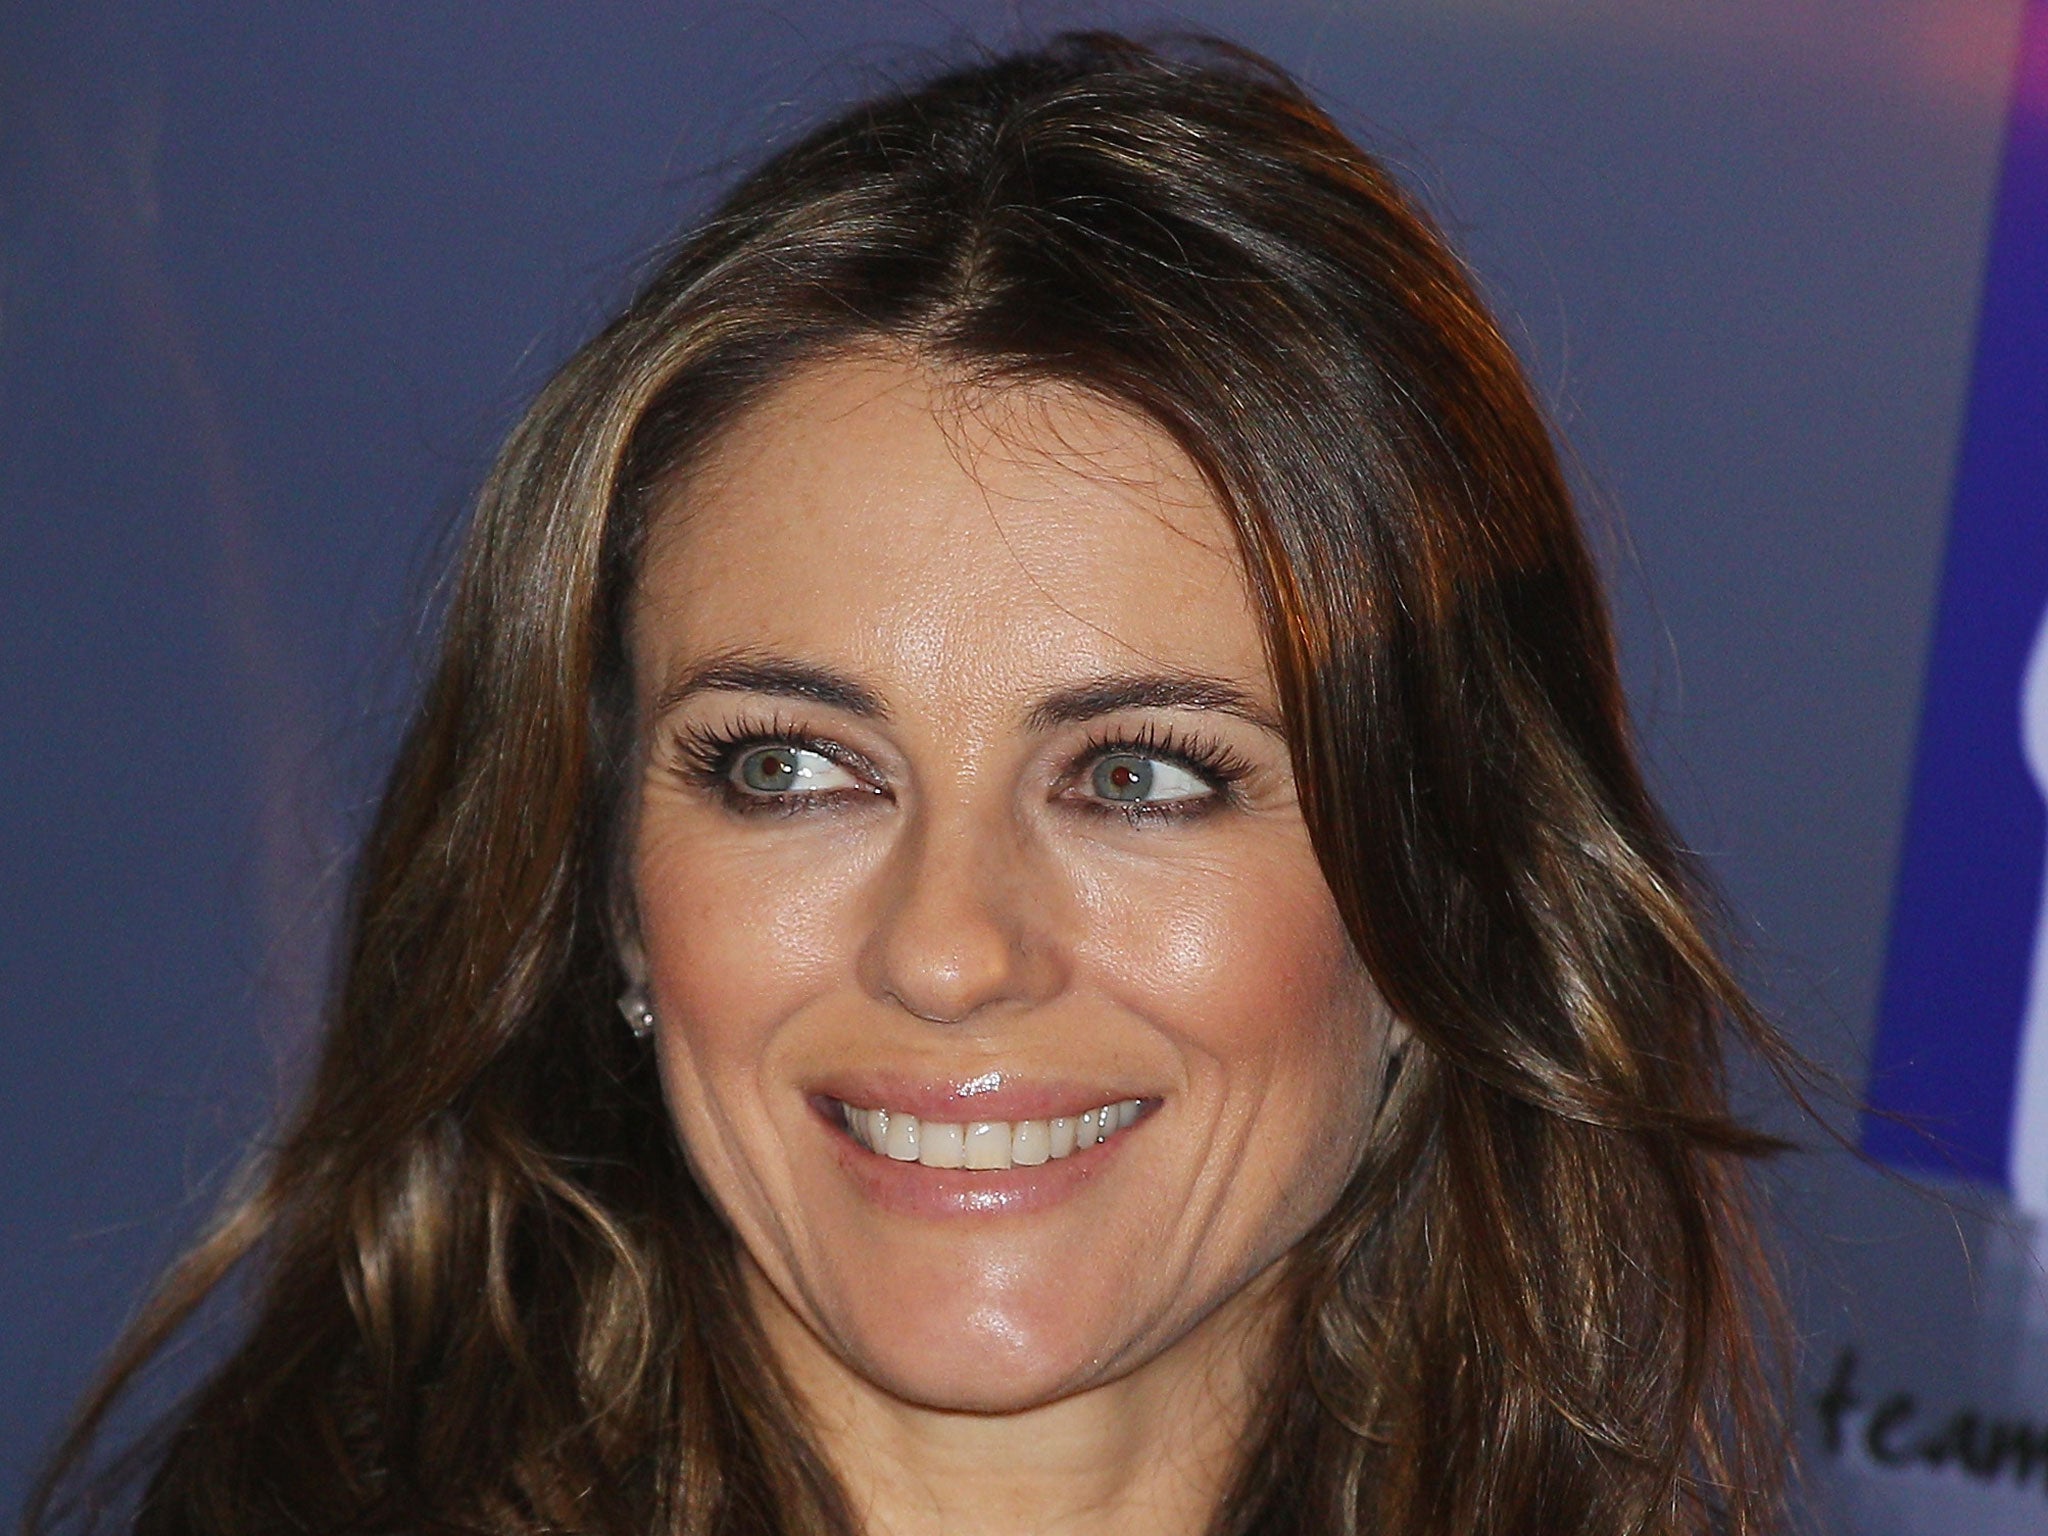 Liz Hurley is selling her shows for charity